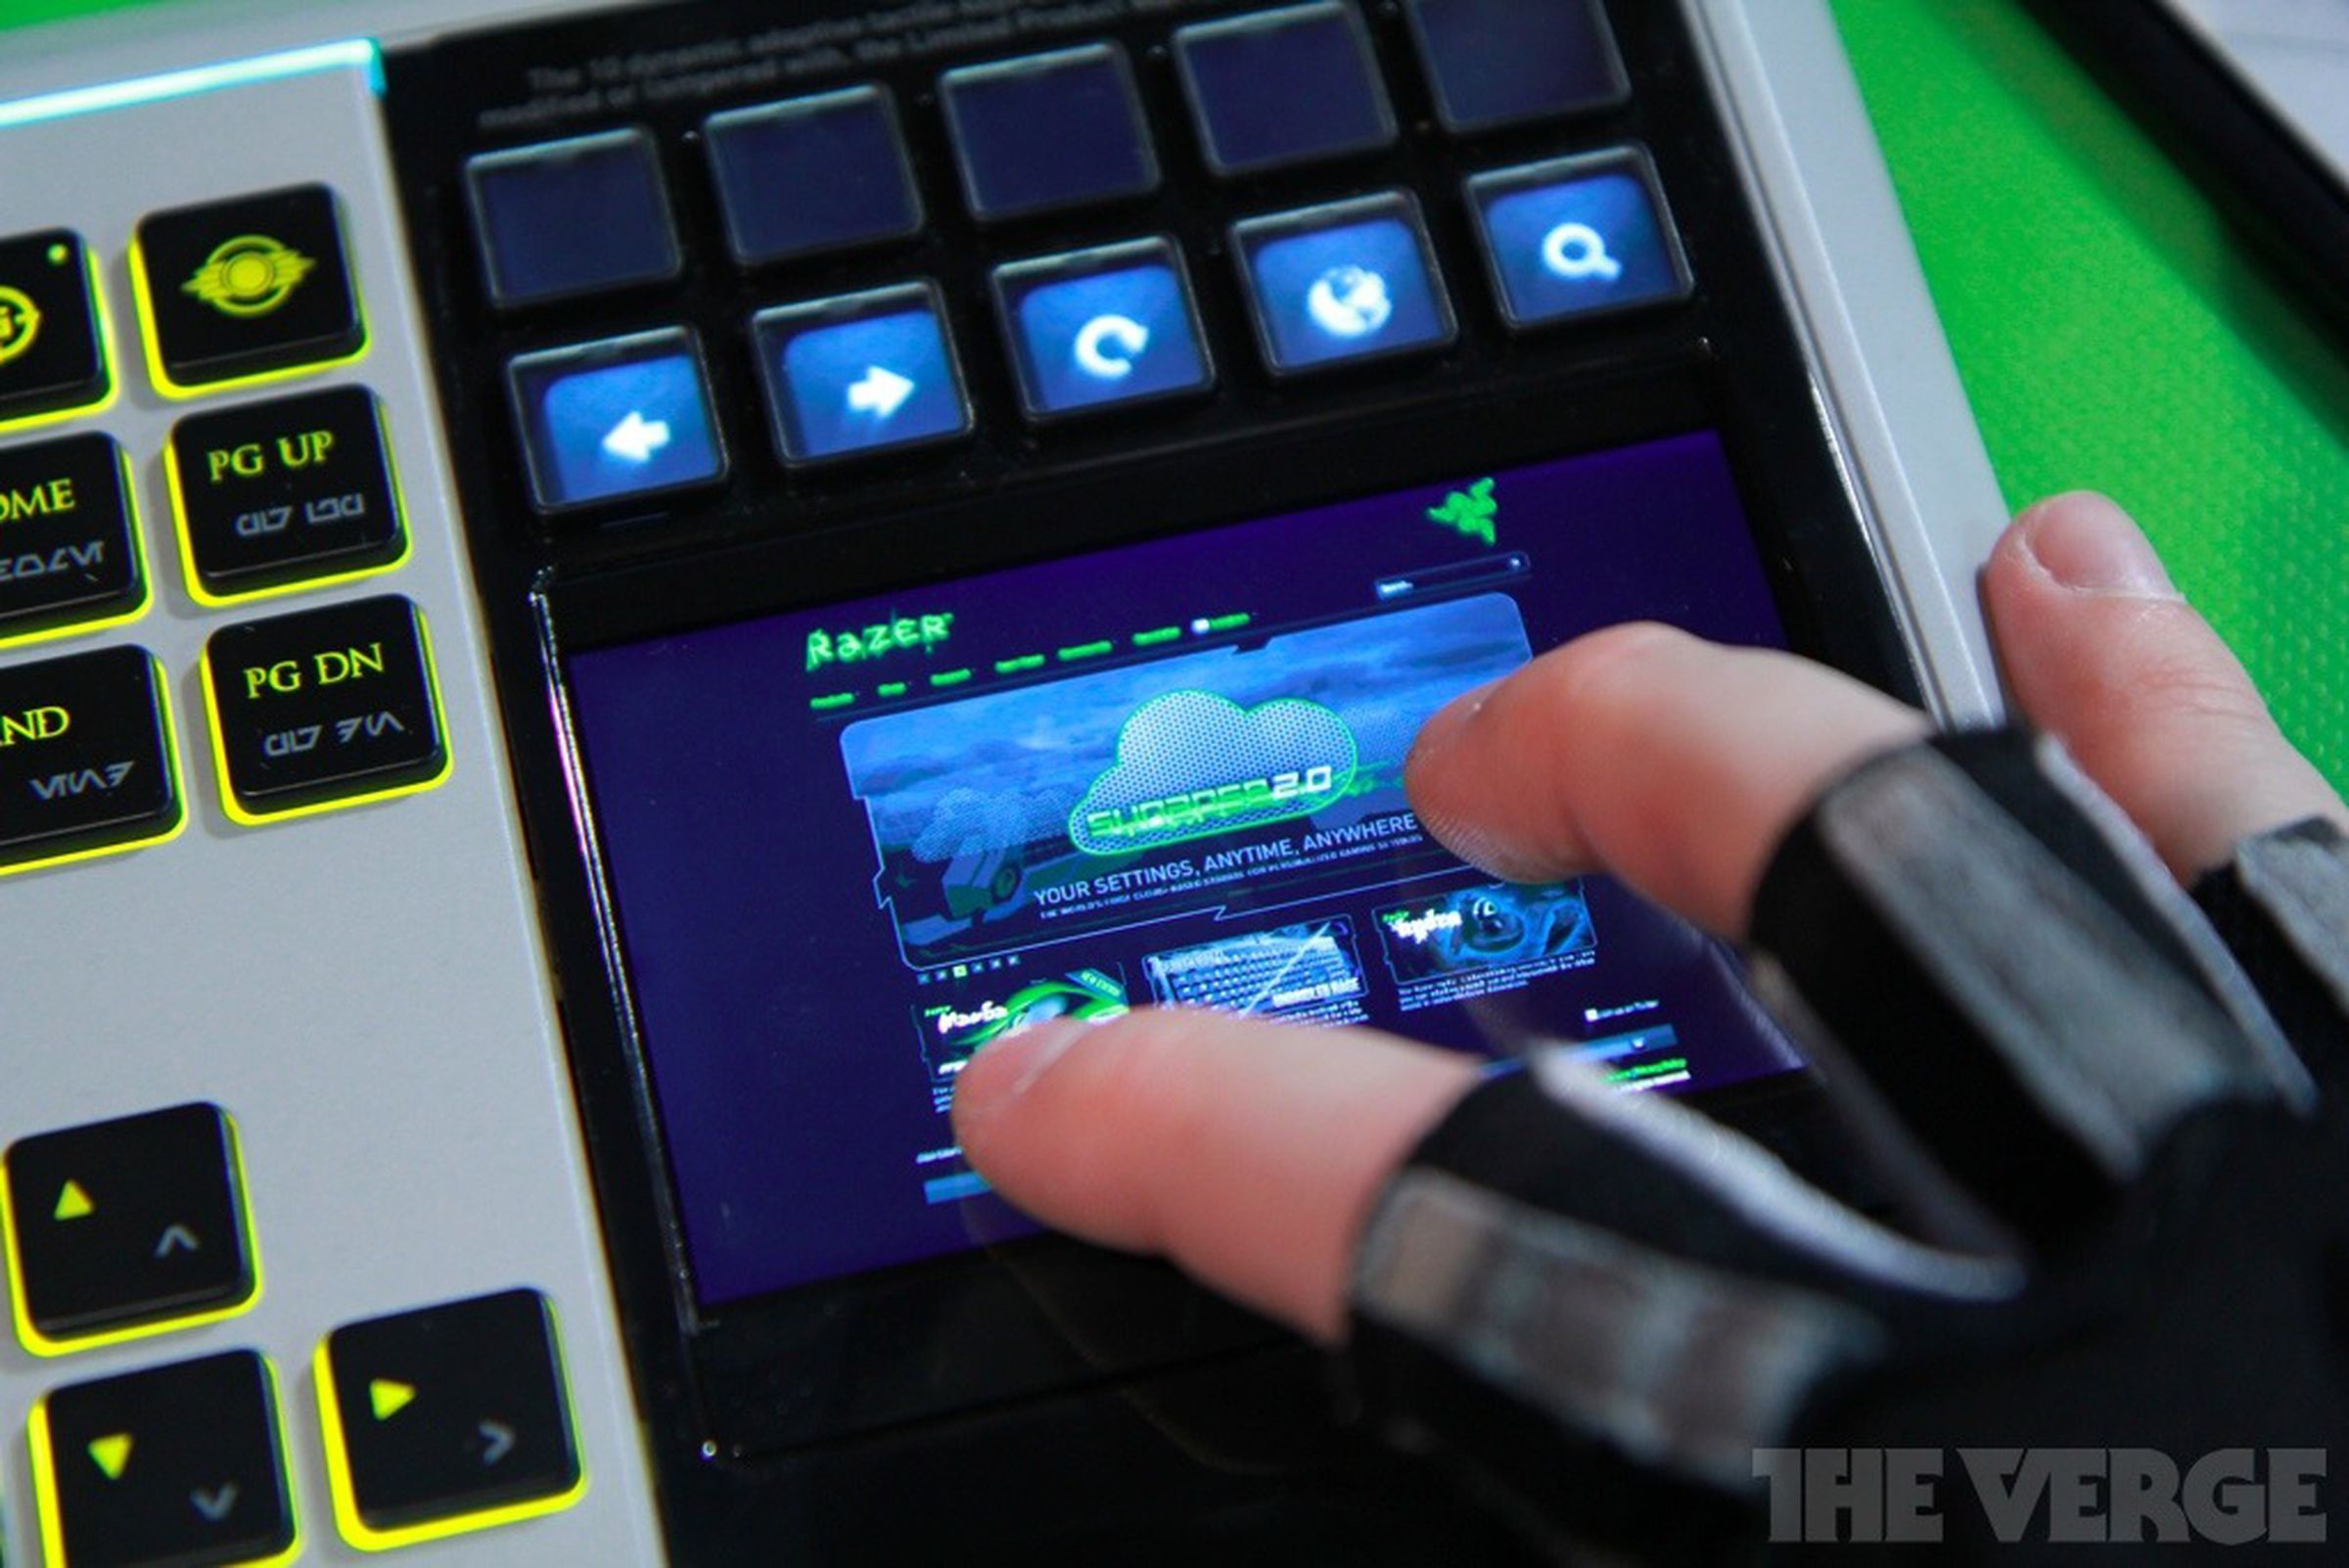 Razer's touchscreen "Star Wars: The Old Republic" keyboard hands-on pictures